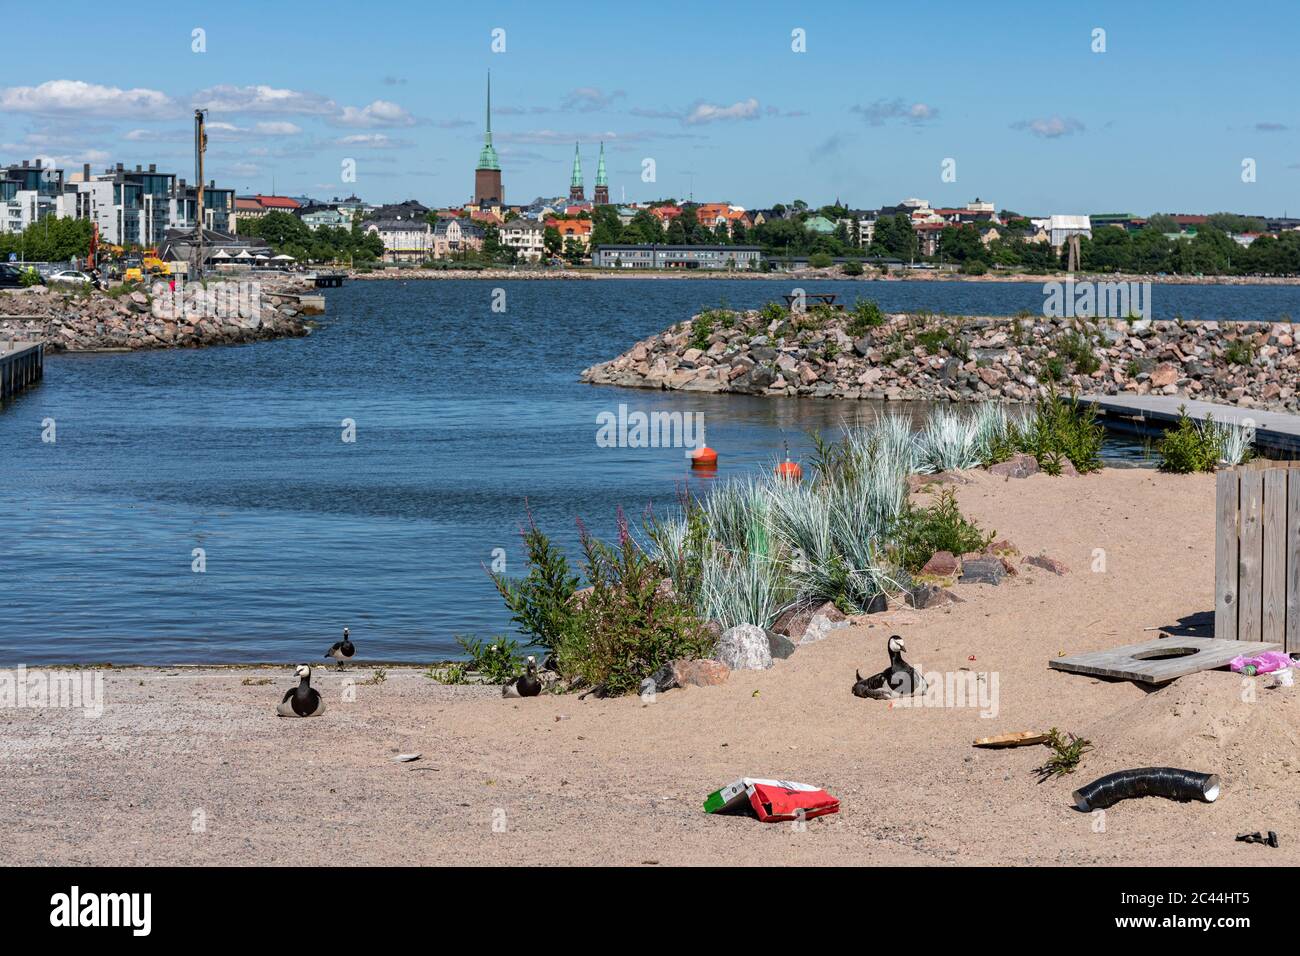 Abandoned sandy beach of Hernesaaren Ranta event center with thrown-away pizza box and barnacle geese in Helsinki, Finland Stock Photo